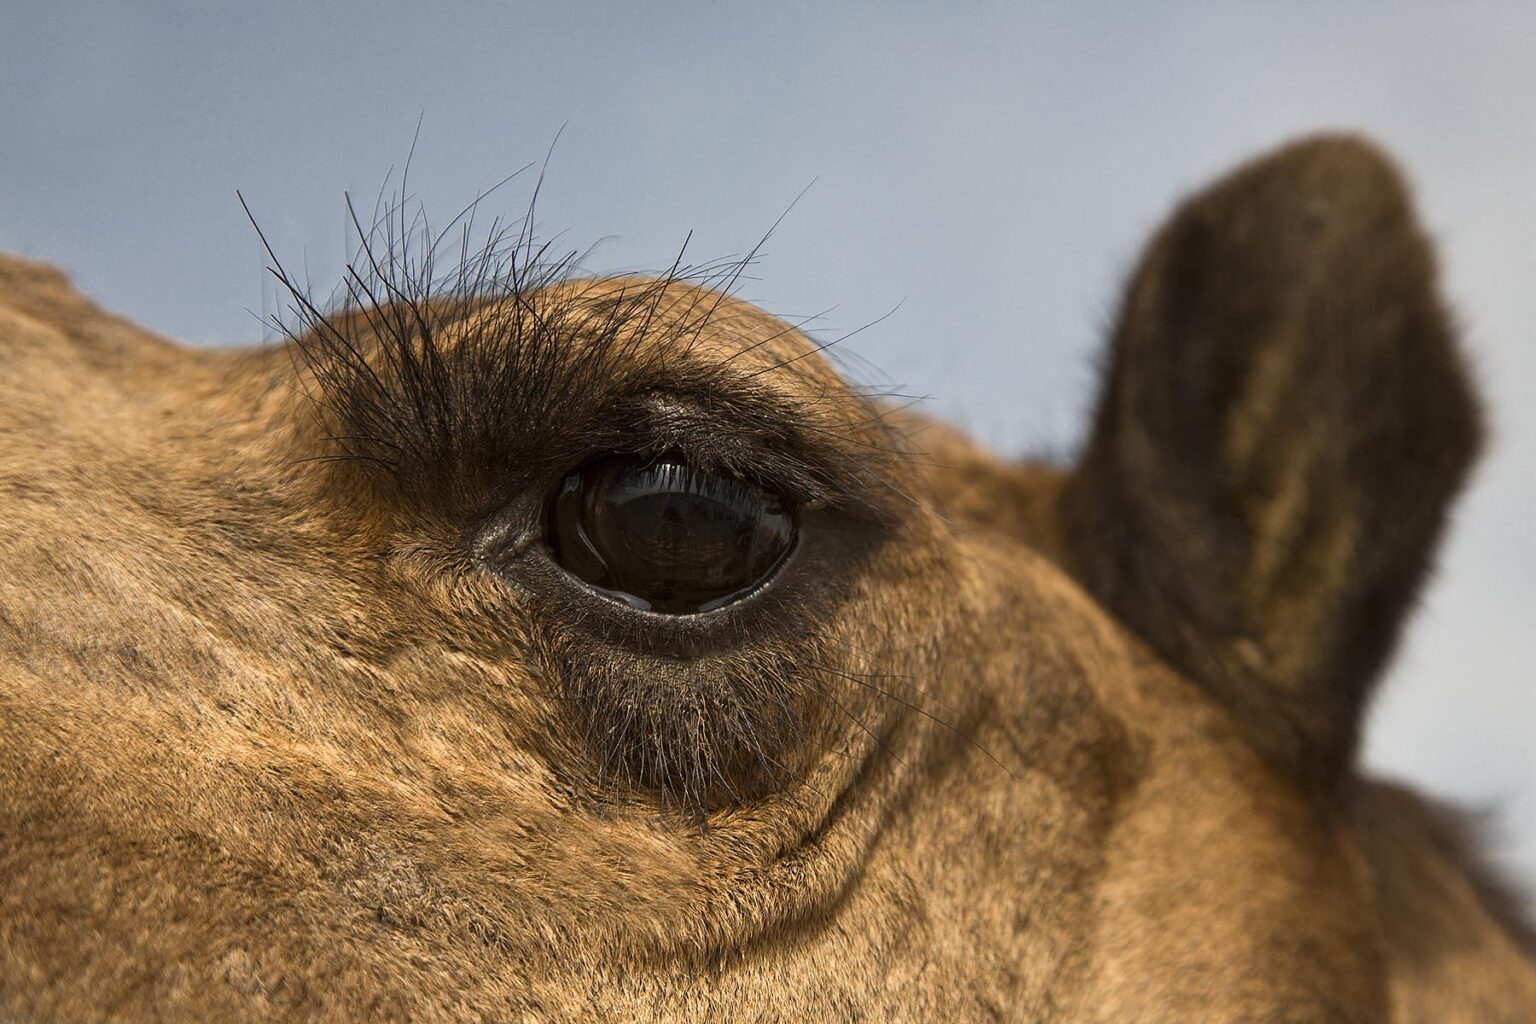 A CAMELS (Camelus bactrianus) EYE and EYE LASHES in the THAR DESERT - RAJASTHAN, INDIA